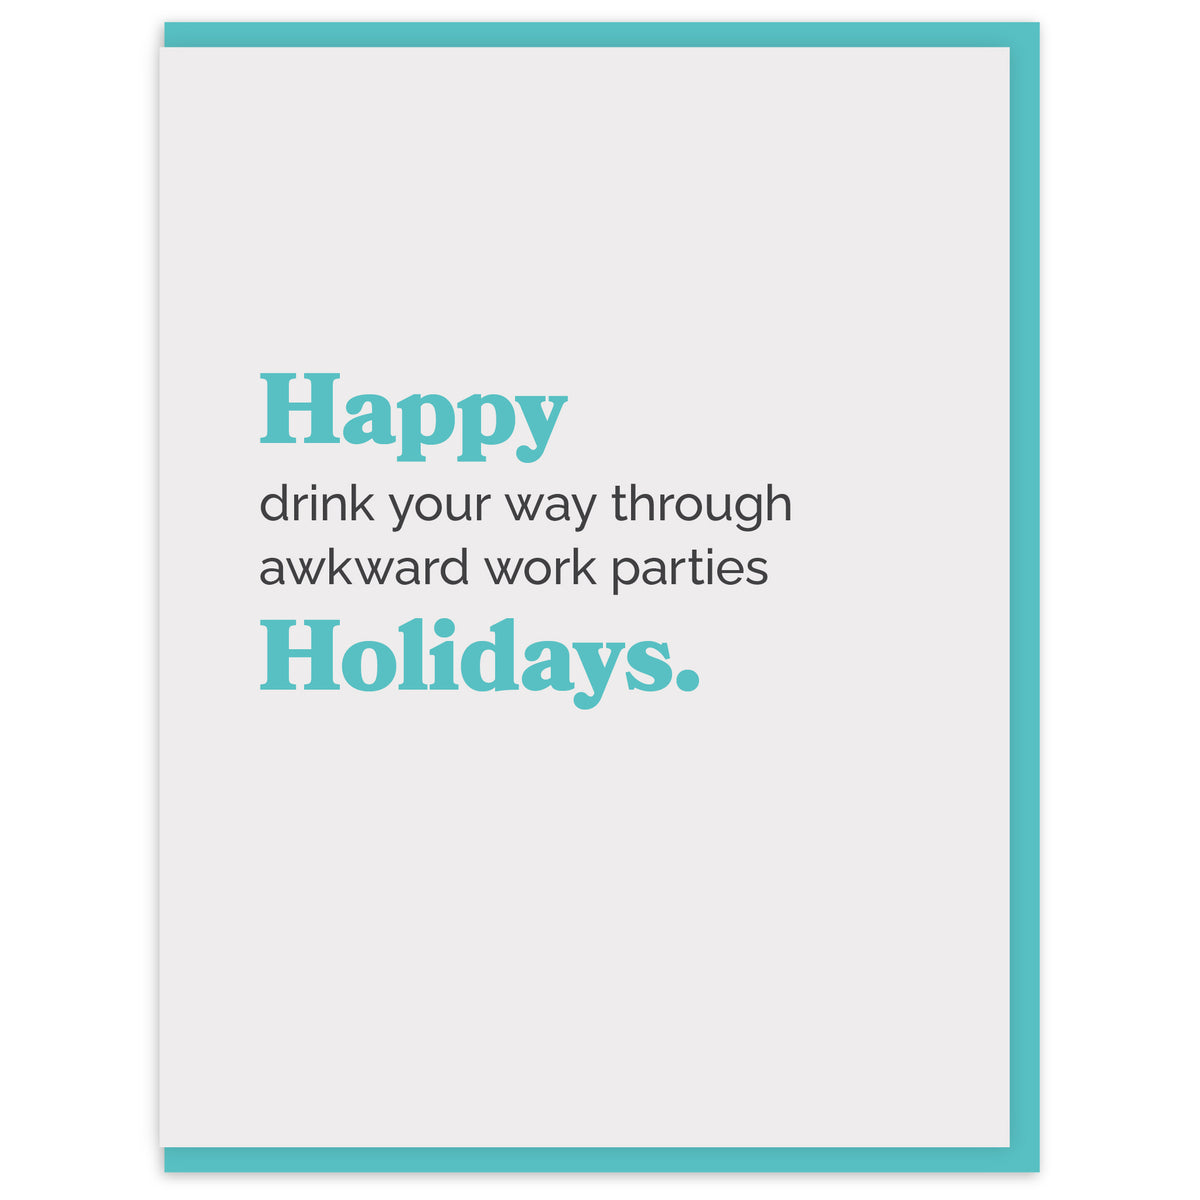 Happy drink your way through awkward work parties Holidays.